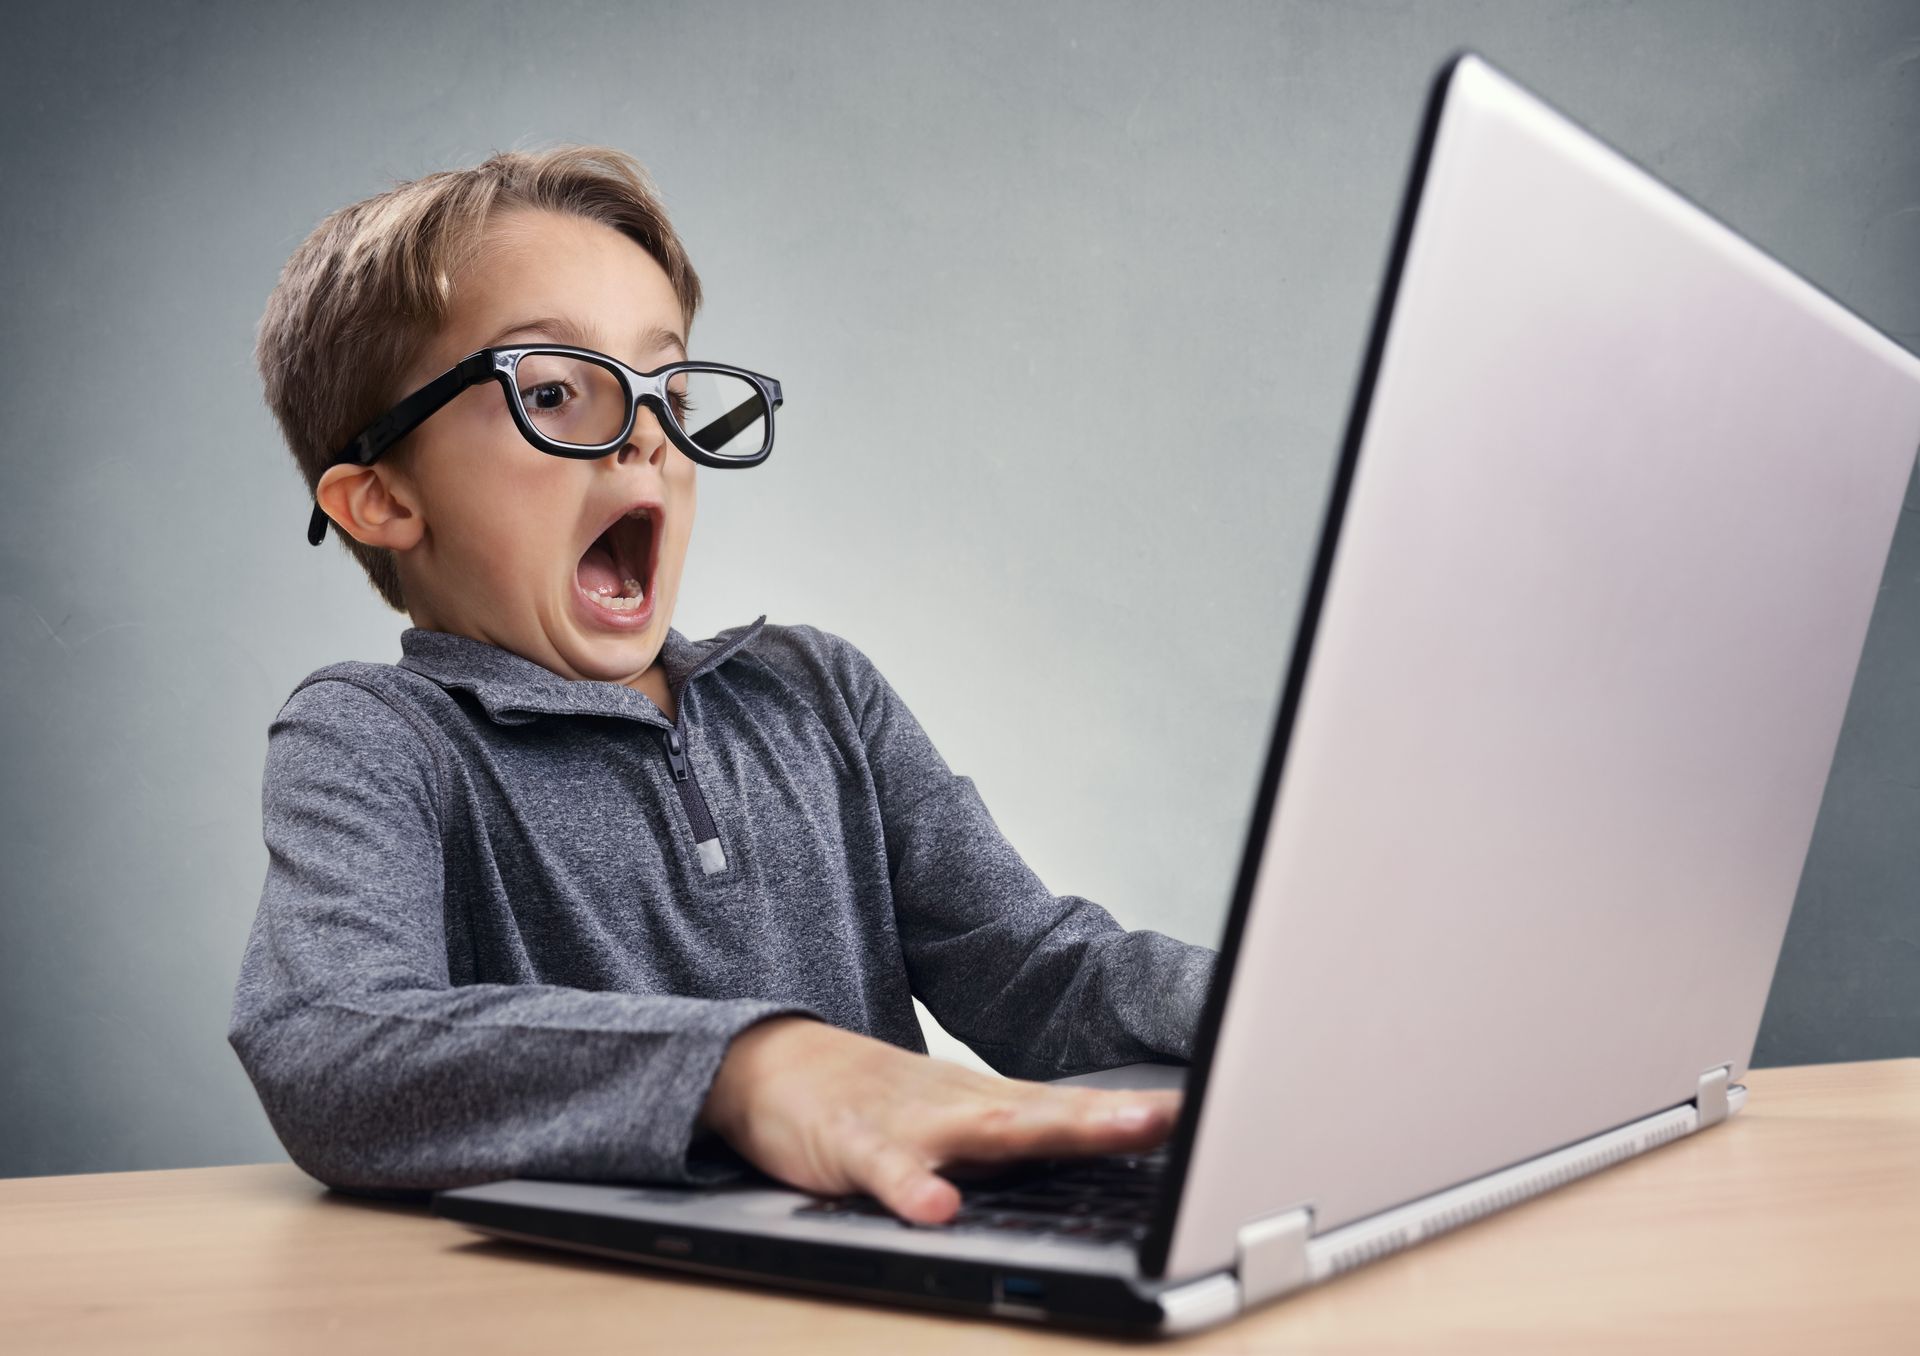 Young boy staring in panic at computer screen